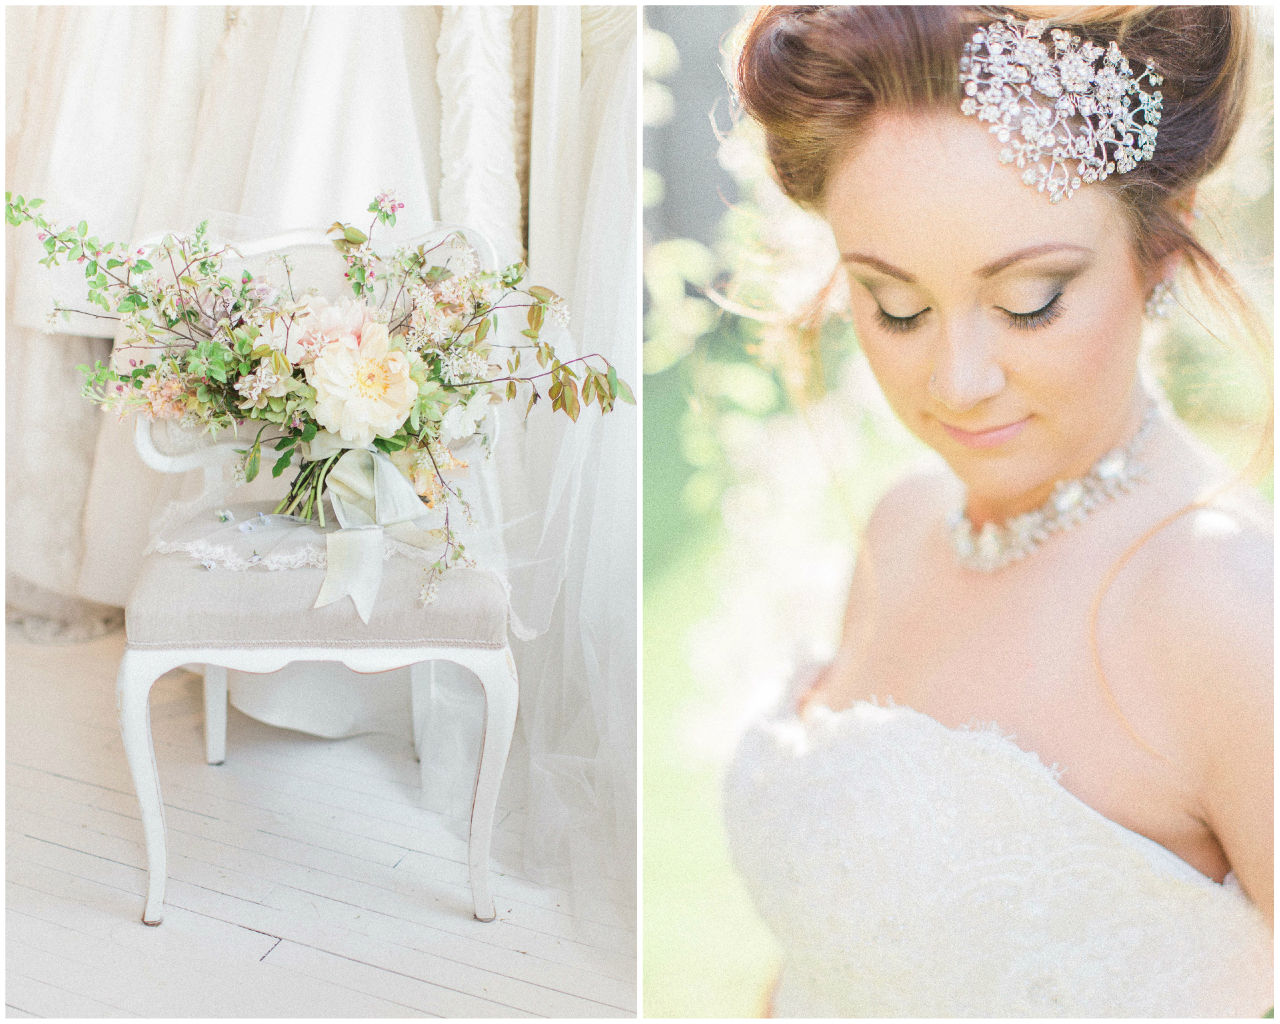 Spring Sweet Bridal | The Day's Design | Samantha James Photography